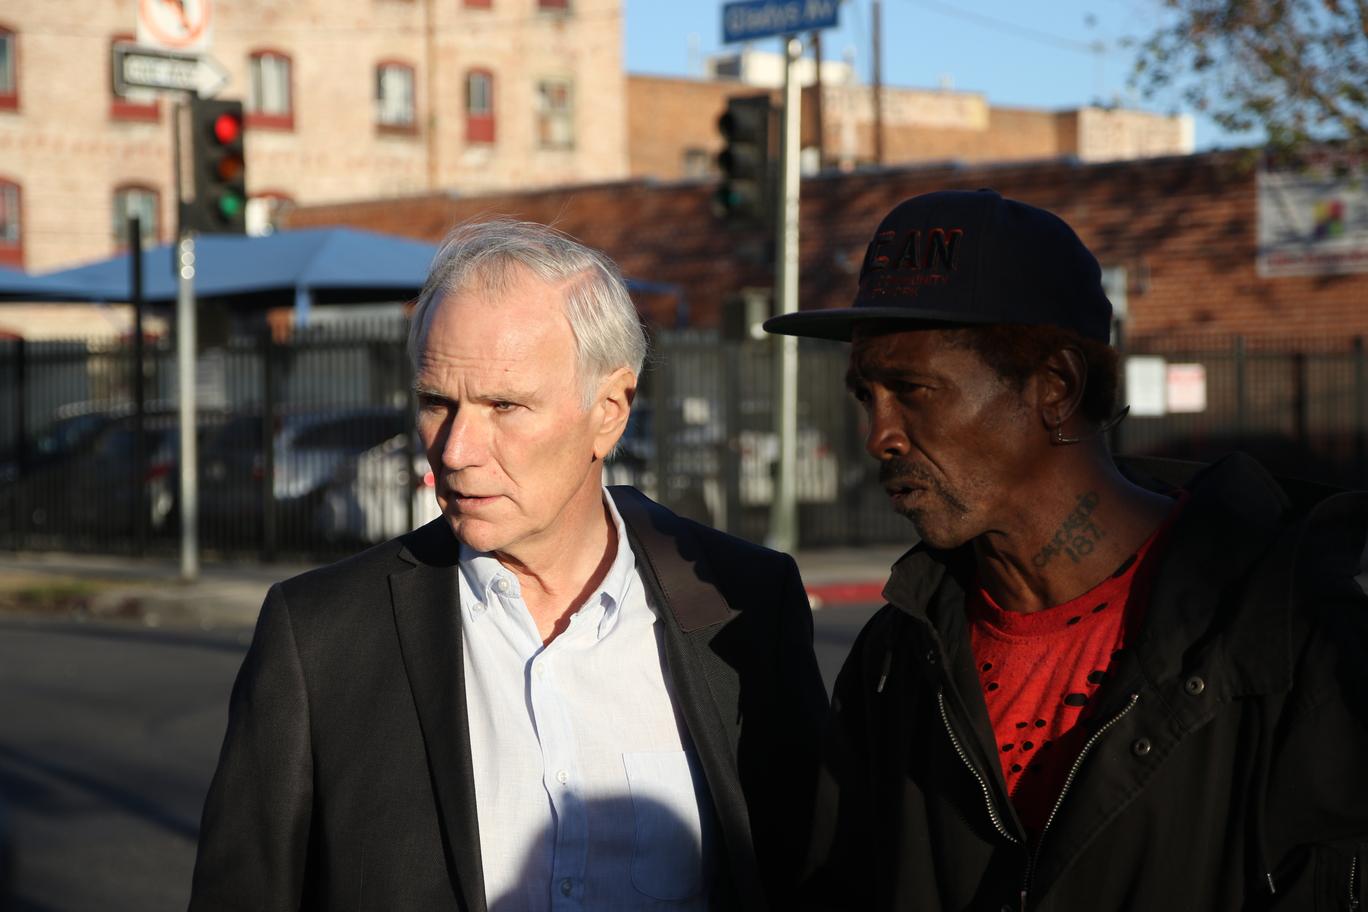 Philip Alston, Special Rapporteur on extreme poverty, visits Skid Row in Los Angeles